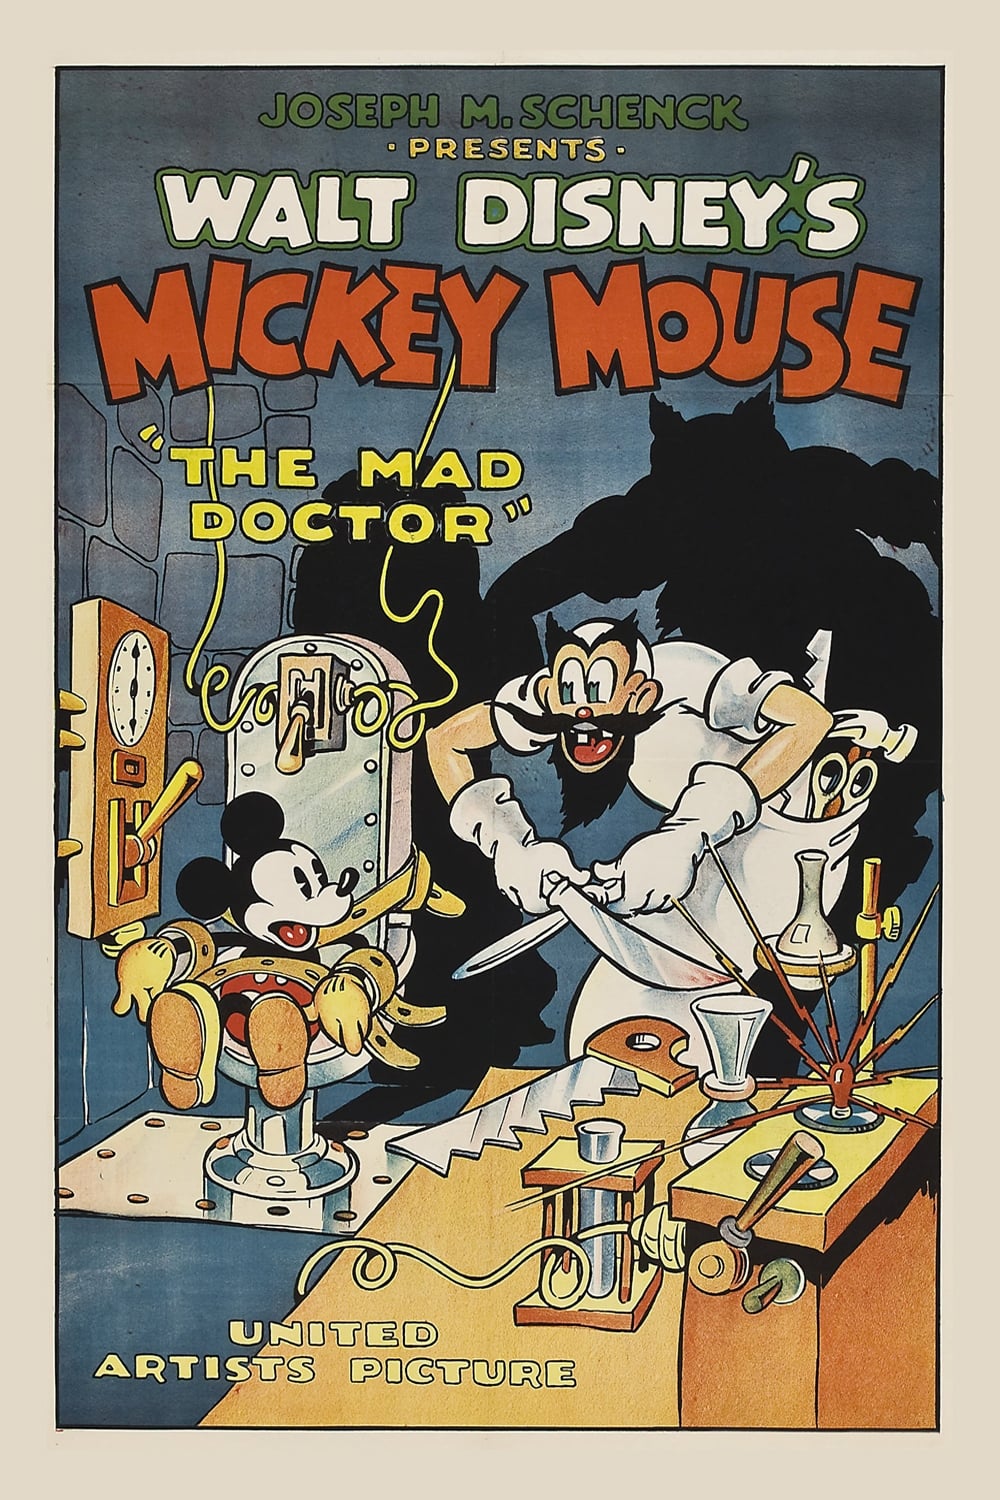 The Mad Doctor (1933)